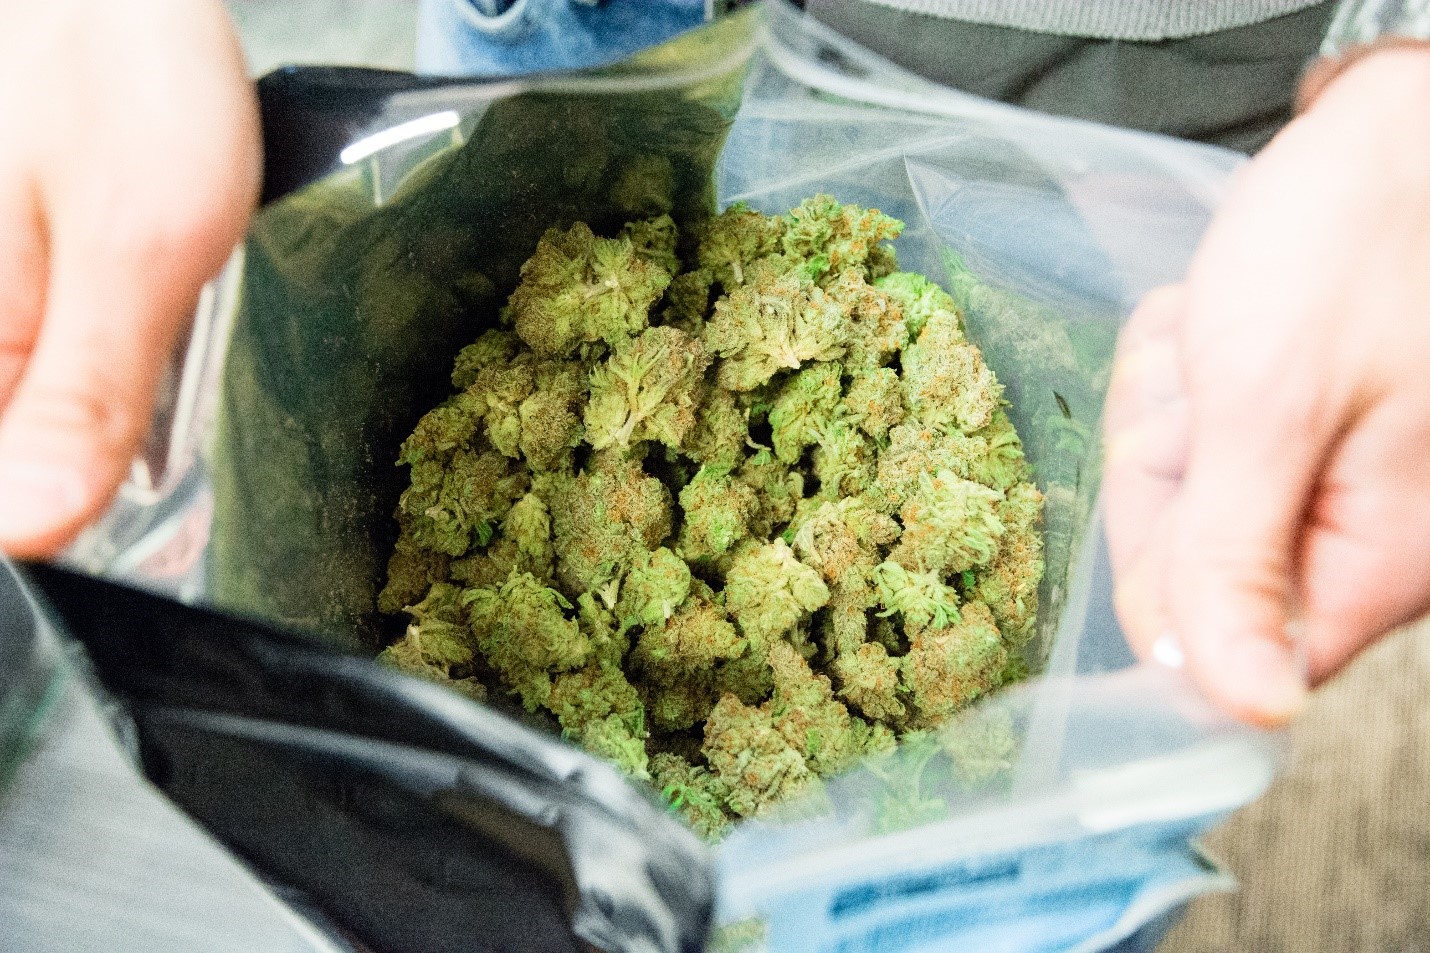 Recreational Marijuana Dispensaries 101: What to Expect on Your First Visit  | PotGuide